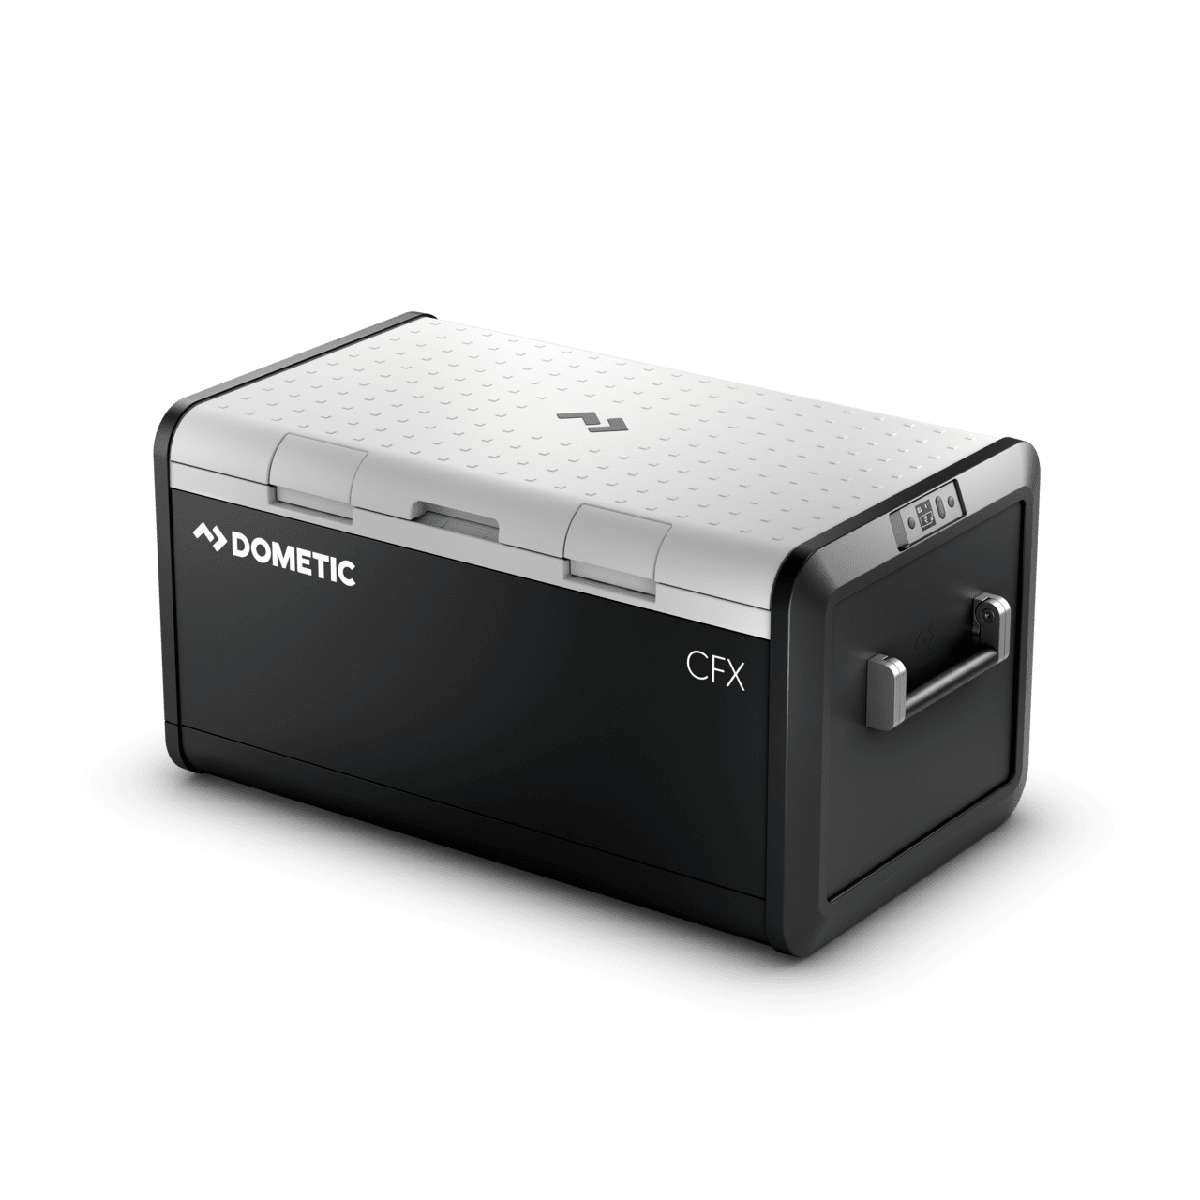 Dometic CFX3 100 Powered Cooler